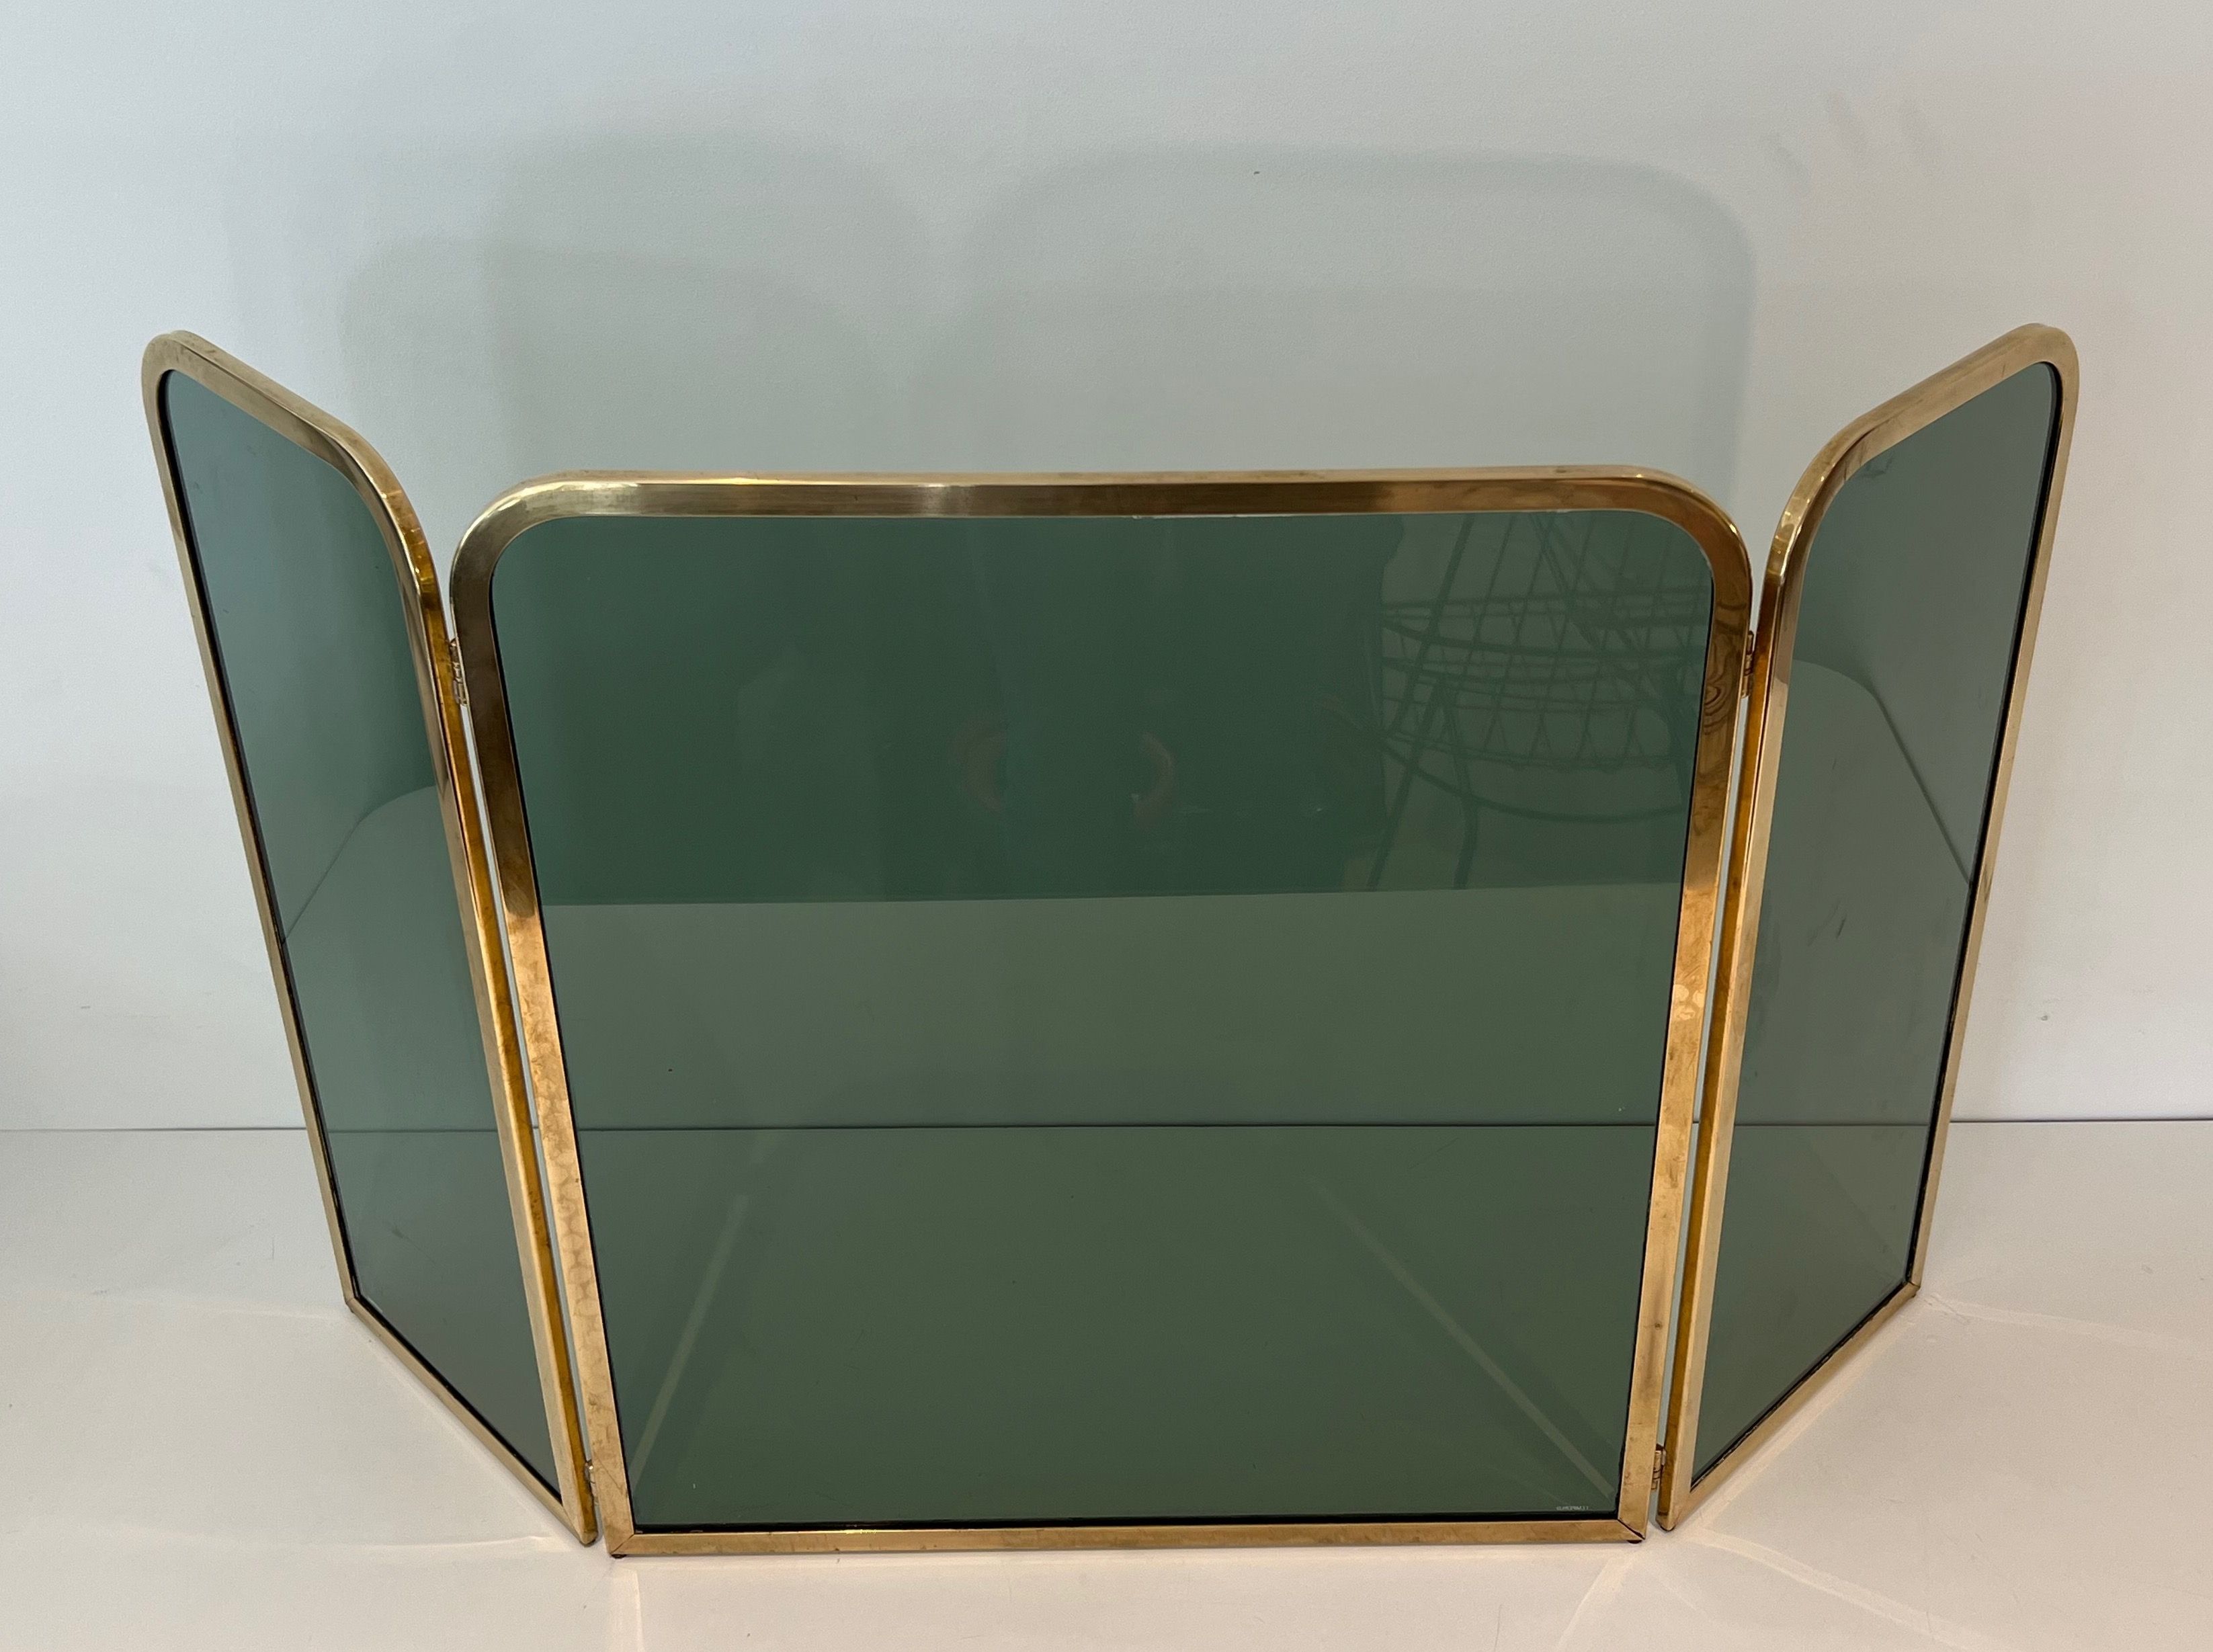 Fireplace Screen Made of 3 Greenish Glass Panels Surrounded by a Brass Frame